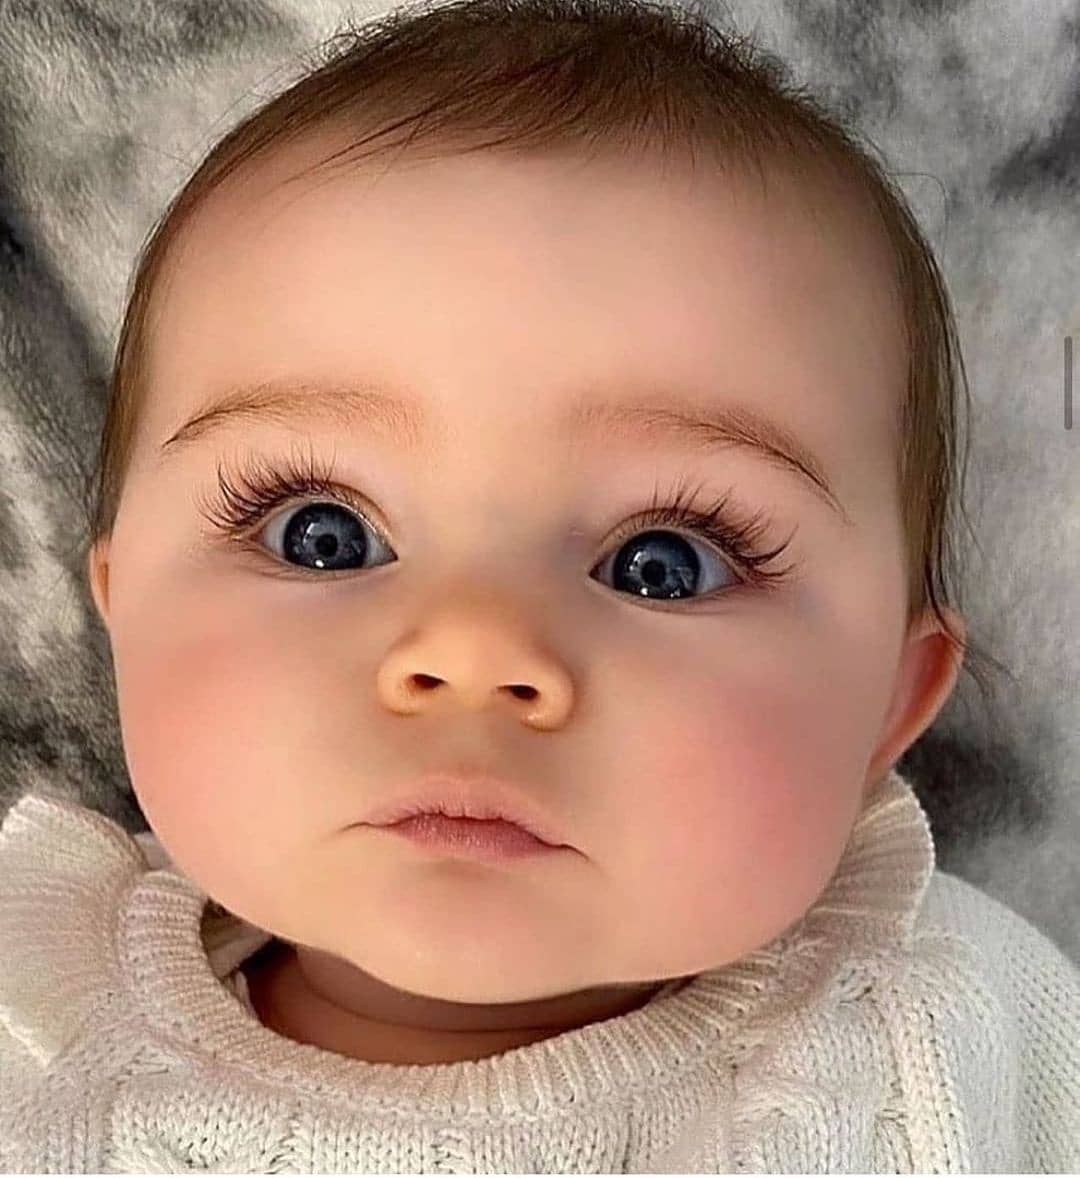 Cute baby looking Instagram profile picture